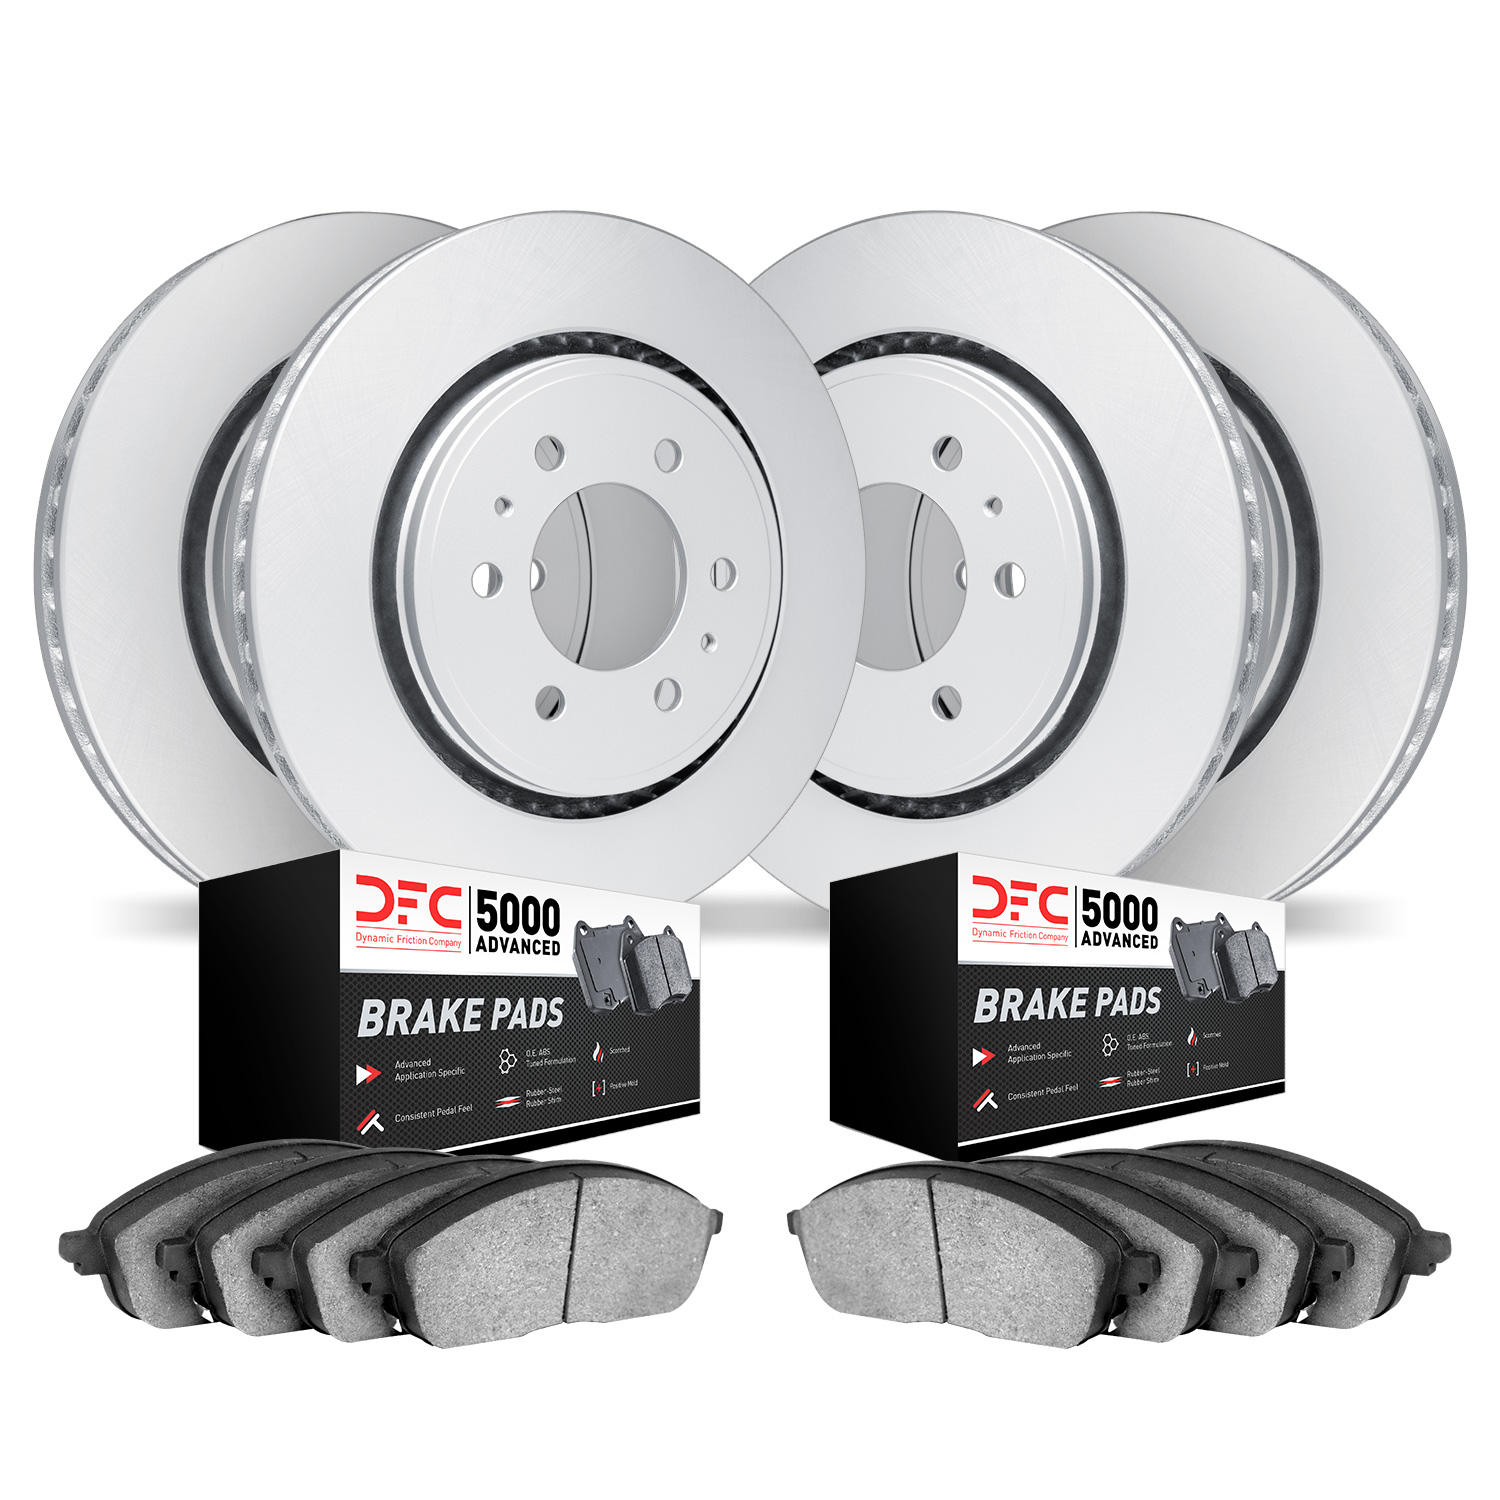 4504-48025 Geospec Brake Rotors w/5000 Advanced Brake Pads Kit, 2002-2005 GM, Position: Front and Rear